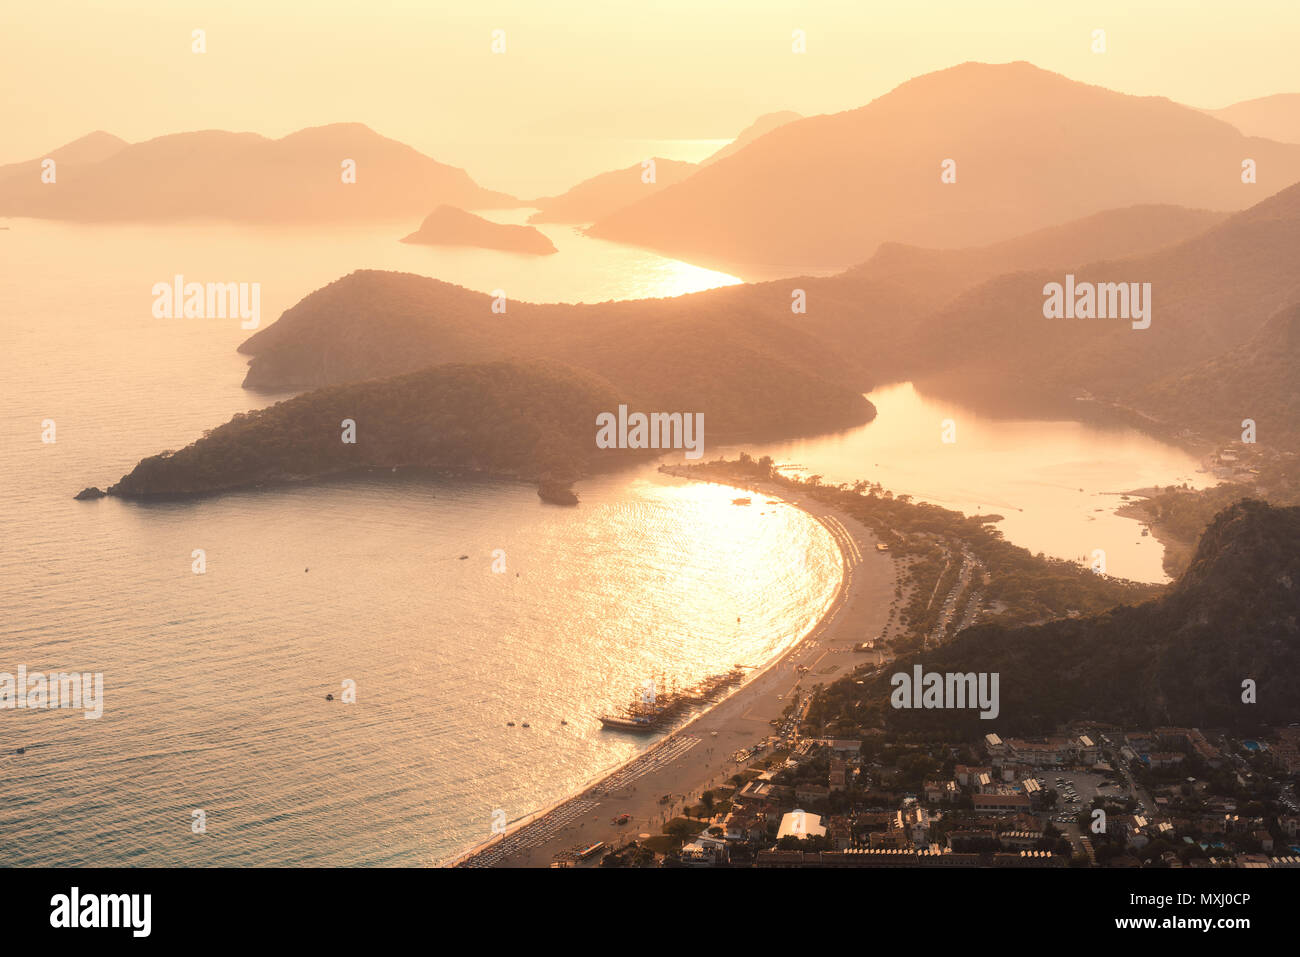 Beautiful seascape at sunset. Landscape with sea, mountains, islands, city, gold sunlight and orange sky in summer. Amazing view from the mountain pea Stock Photo